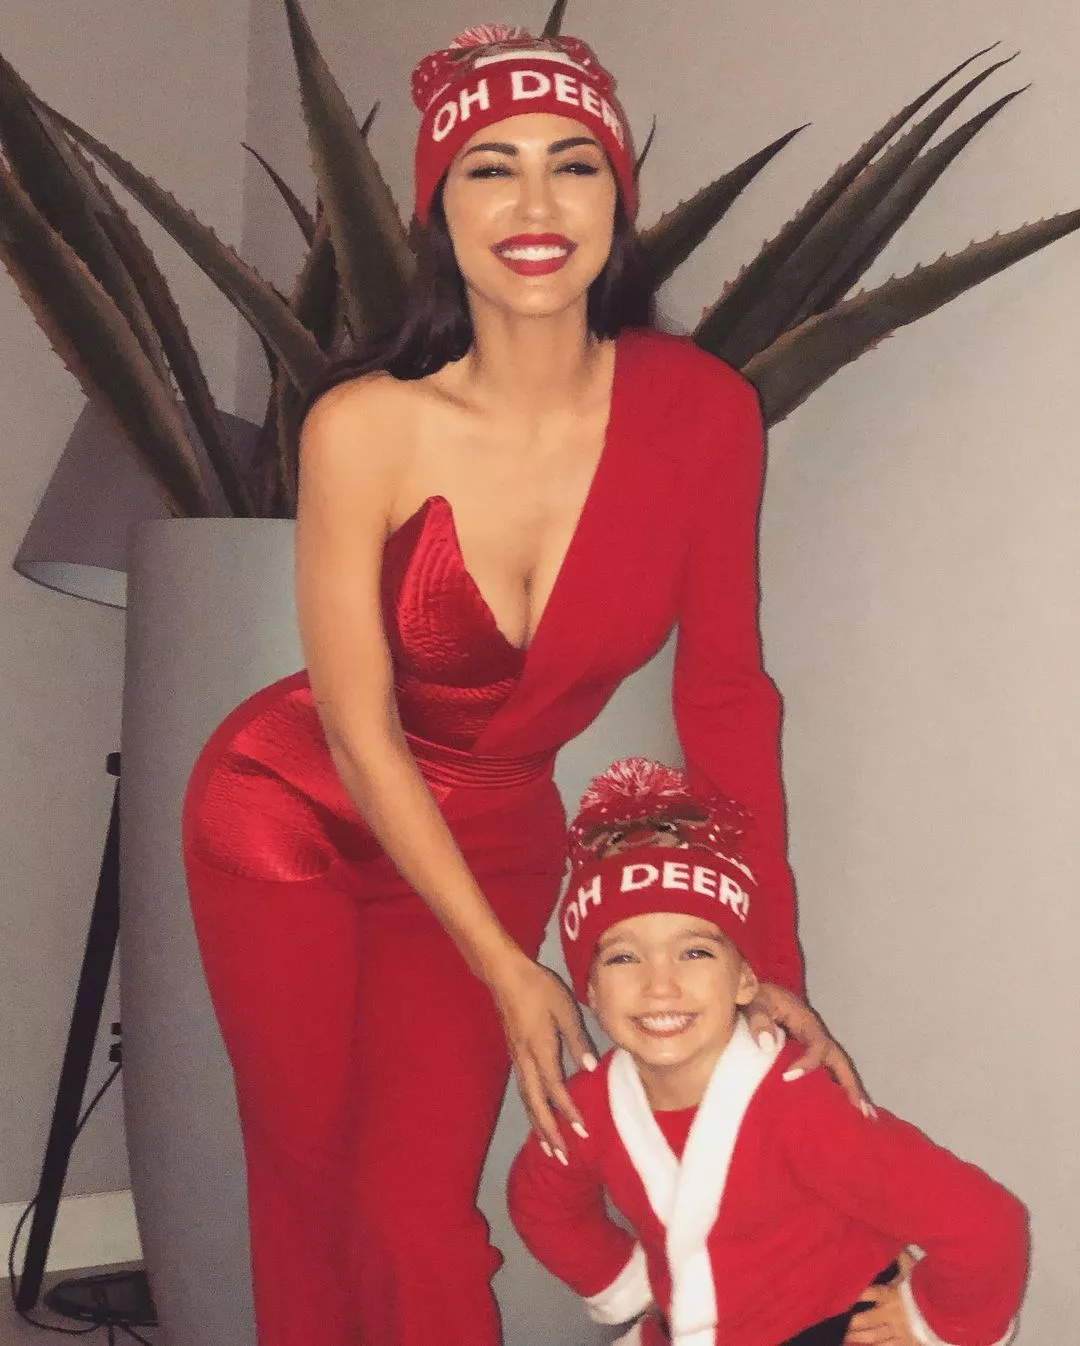 yolanthe cabau movies, short films, songs, dance, hot milf, children, kids, son, daughter, cleavage, christmas, lingerie, mexican